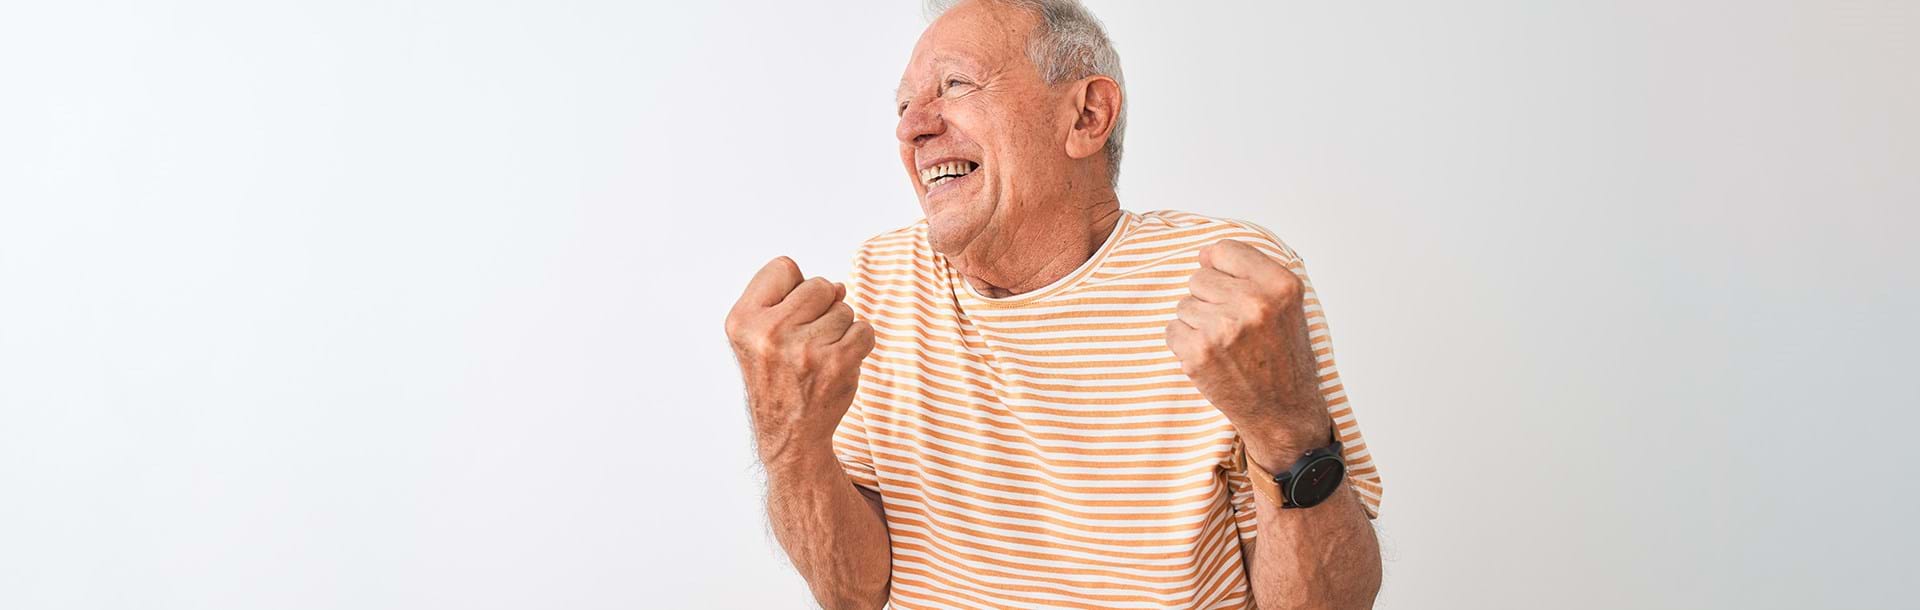 A photo of an elderly man happily cheering